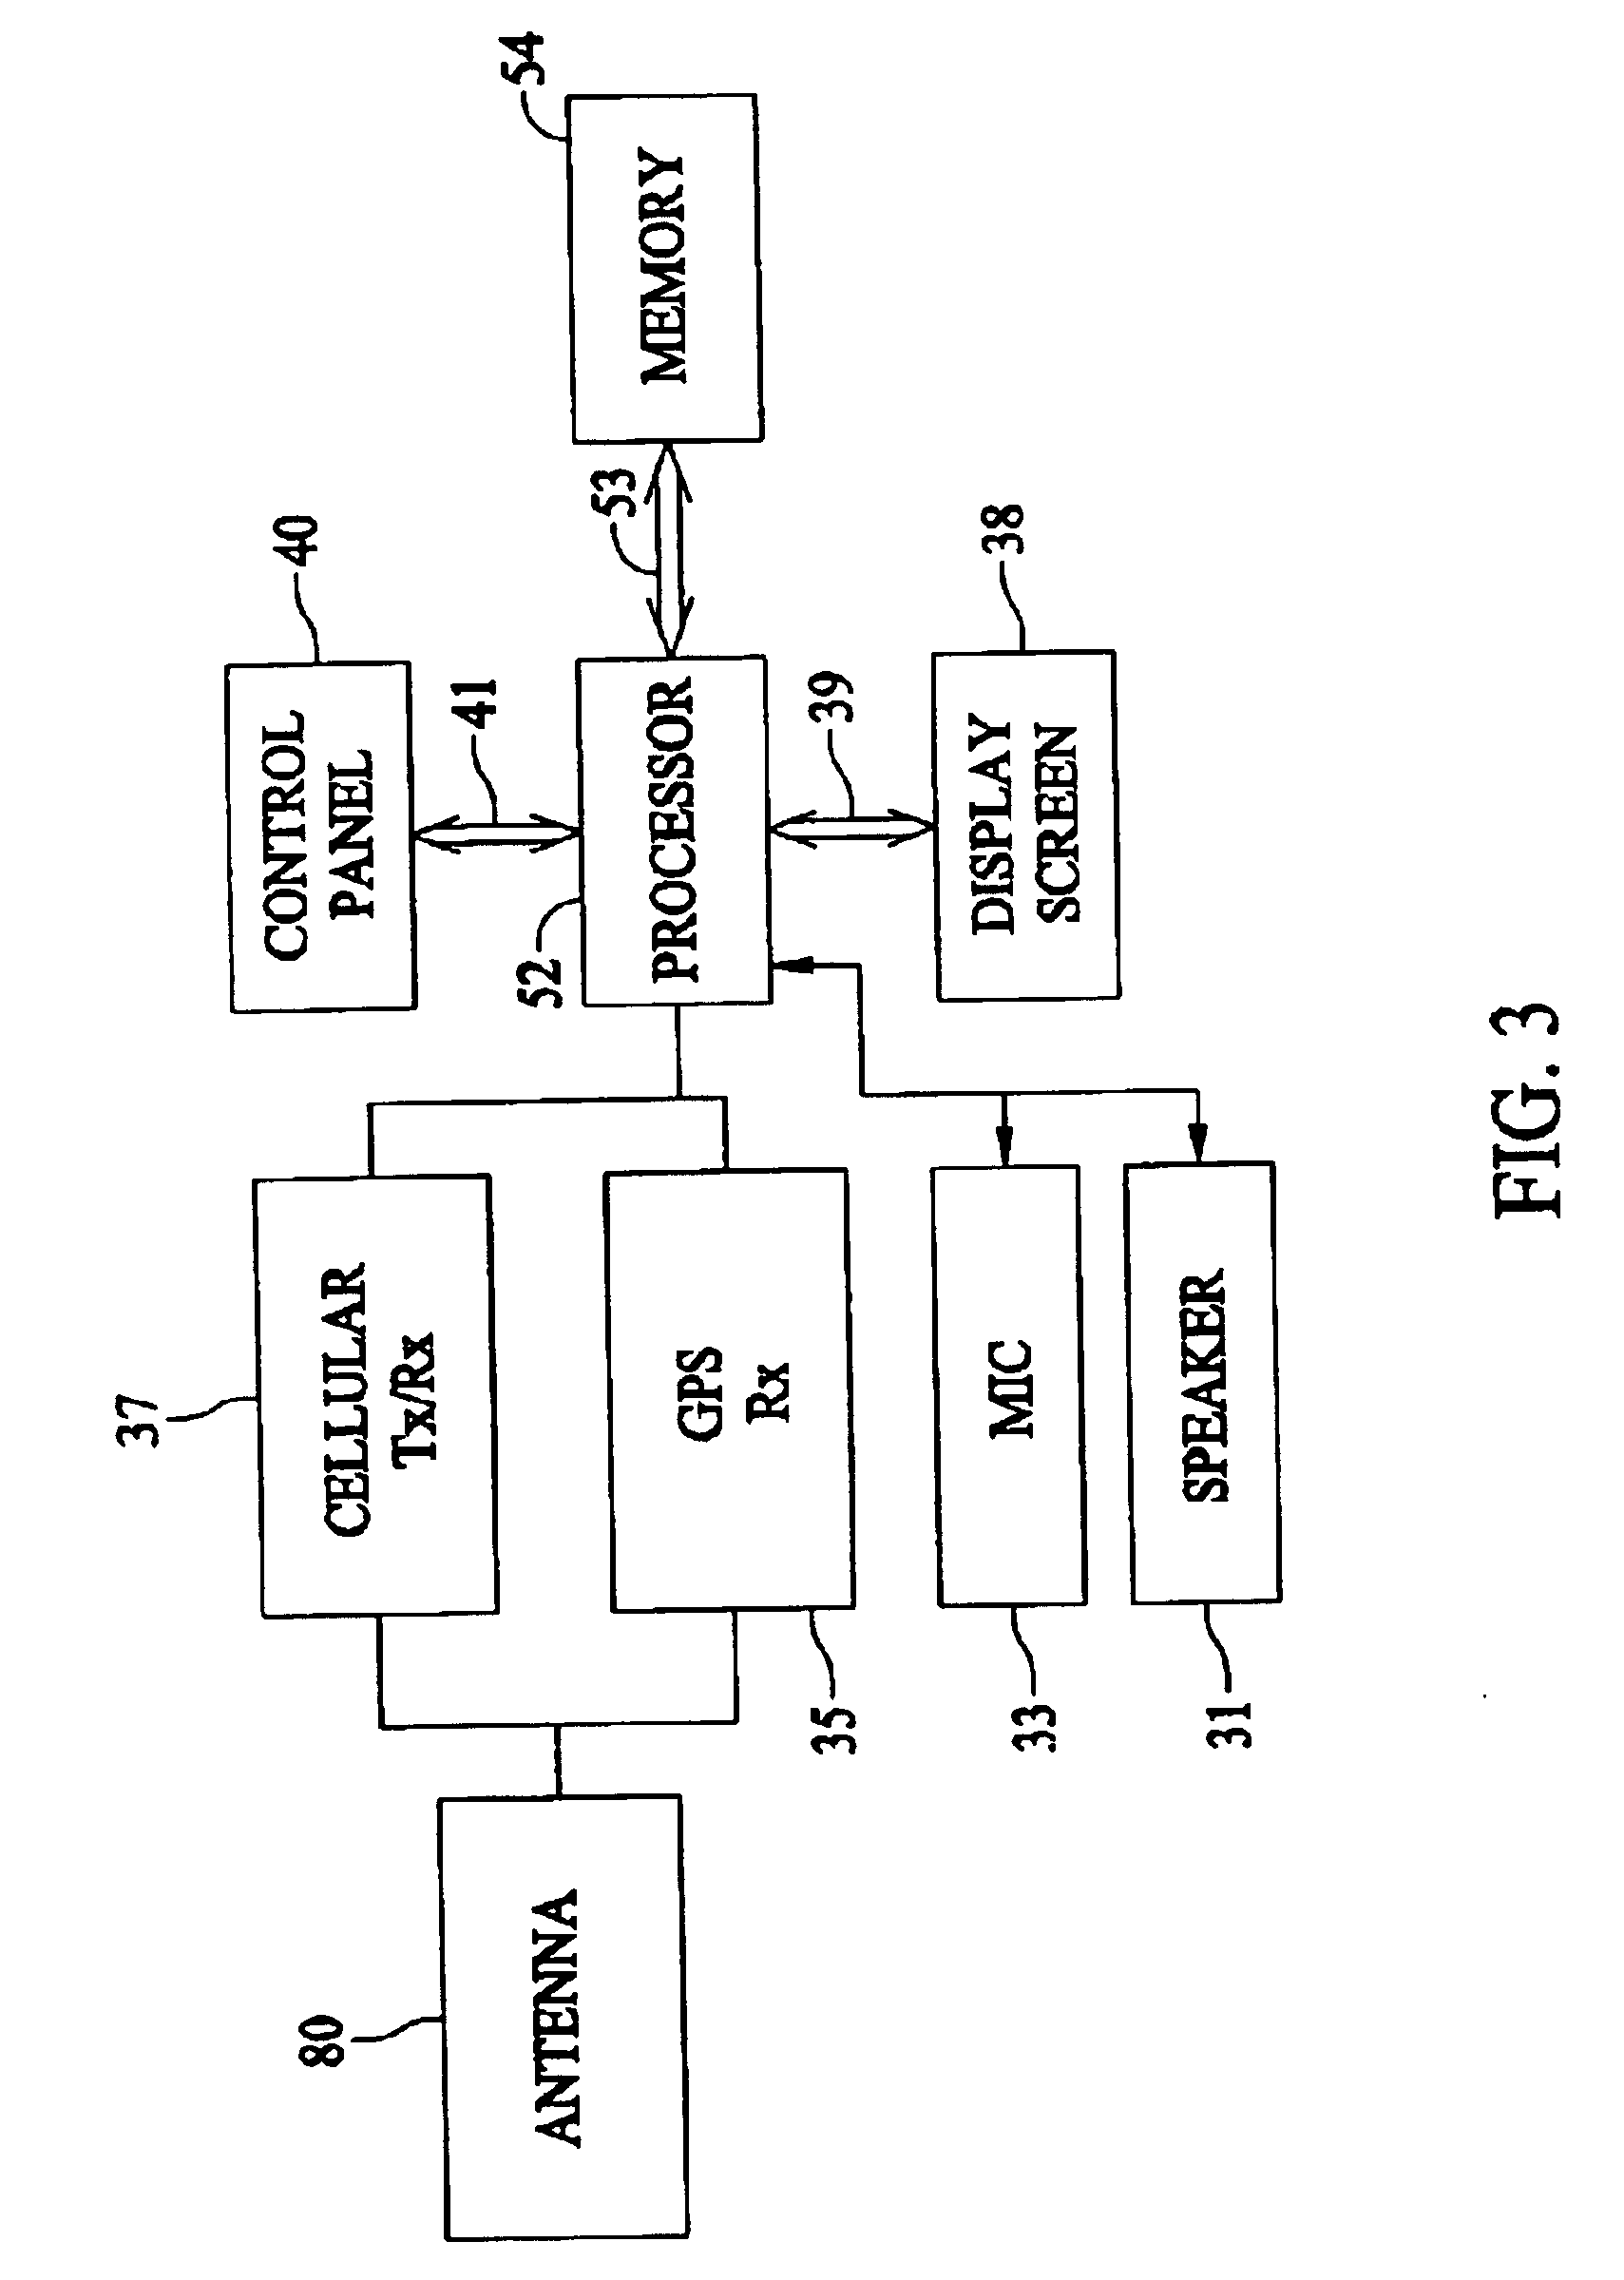 System and method for estimating impedance time through a road network